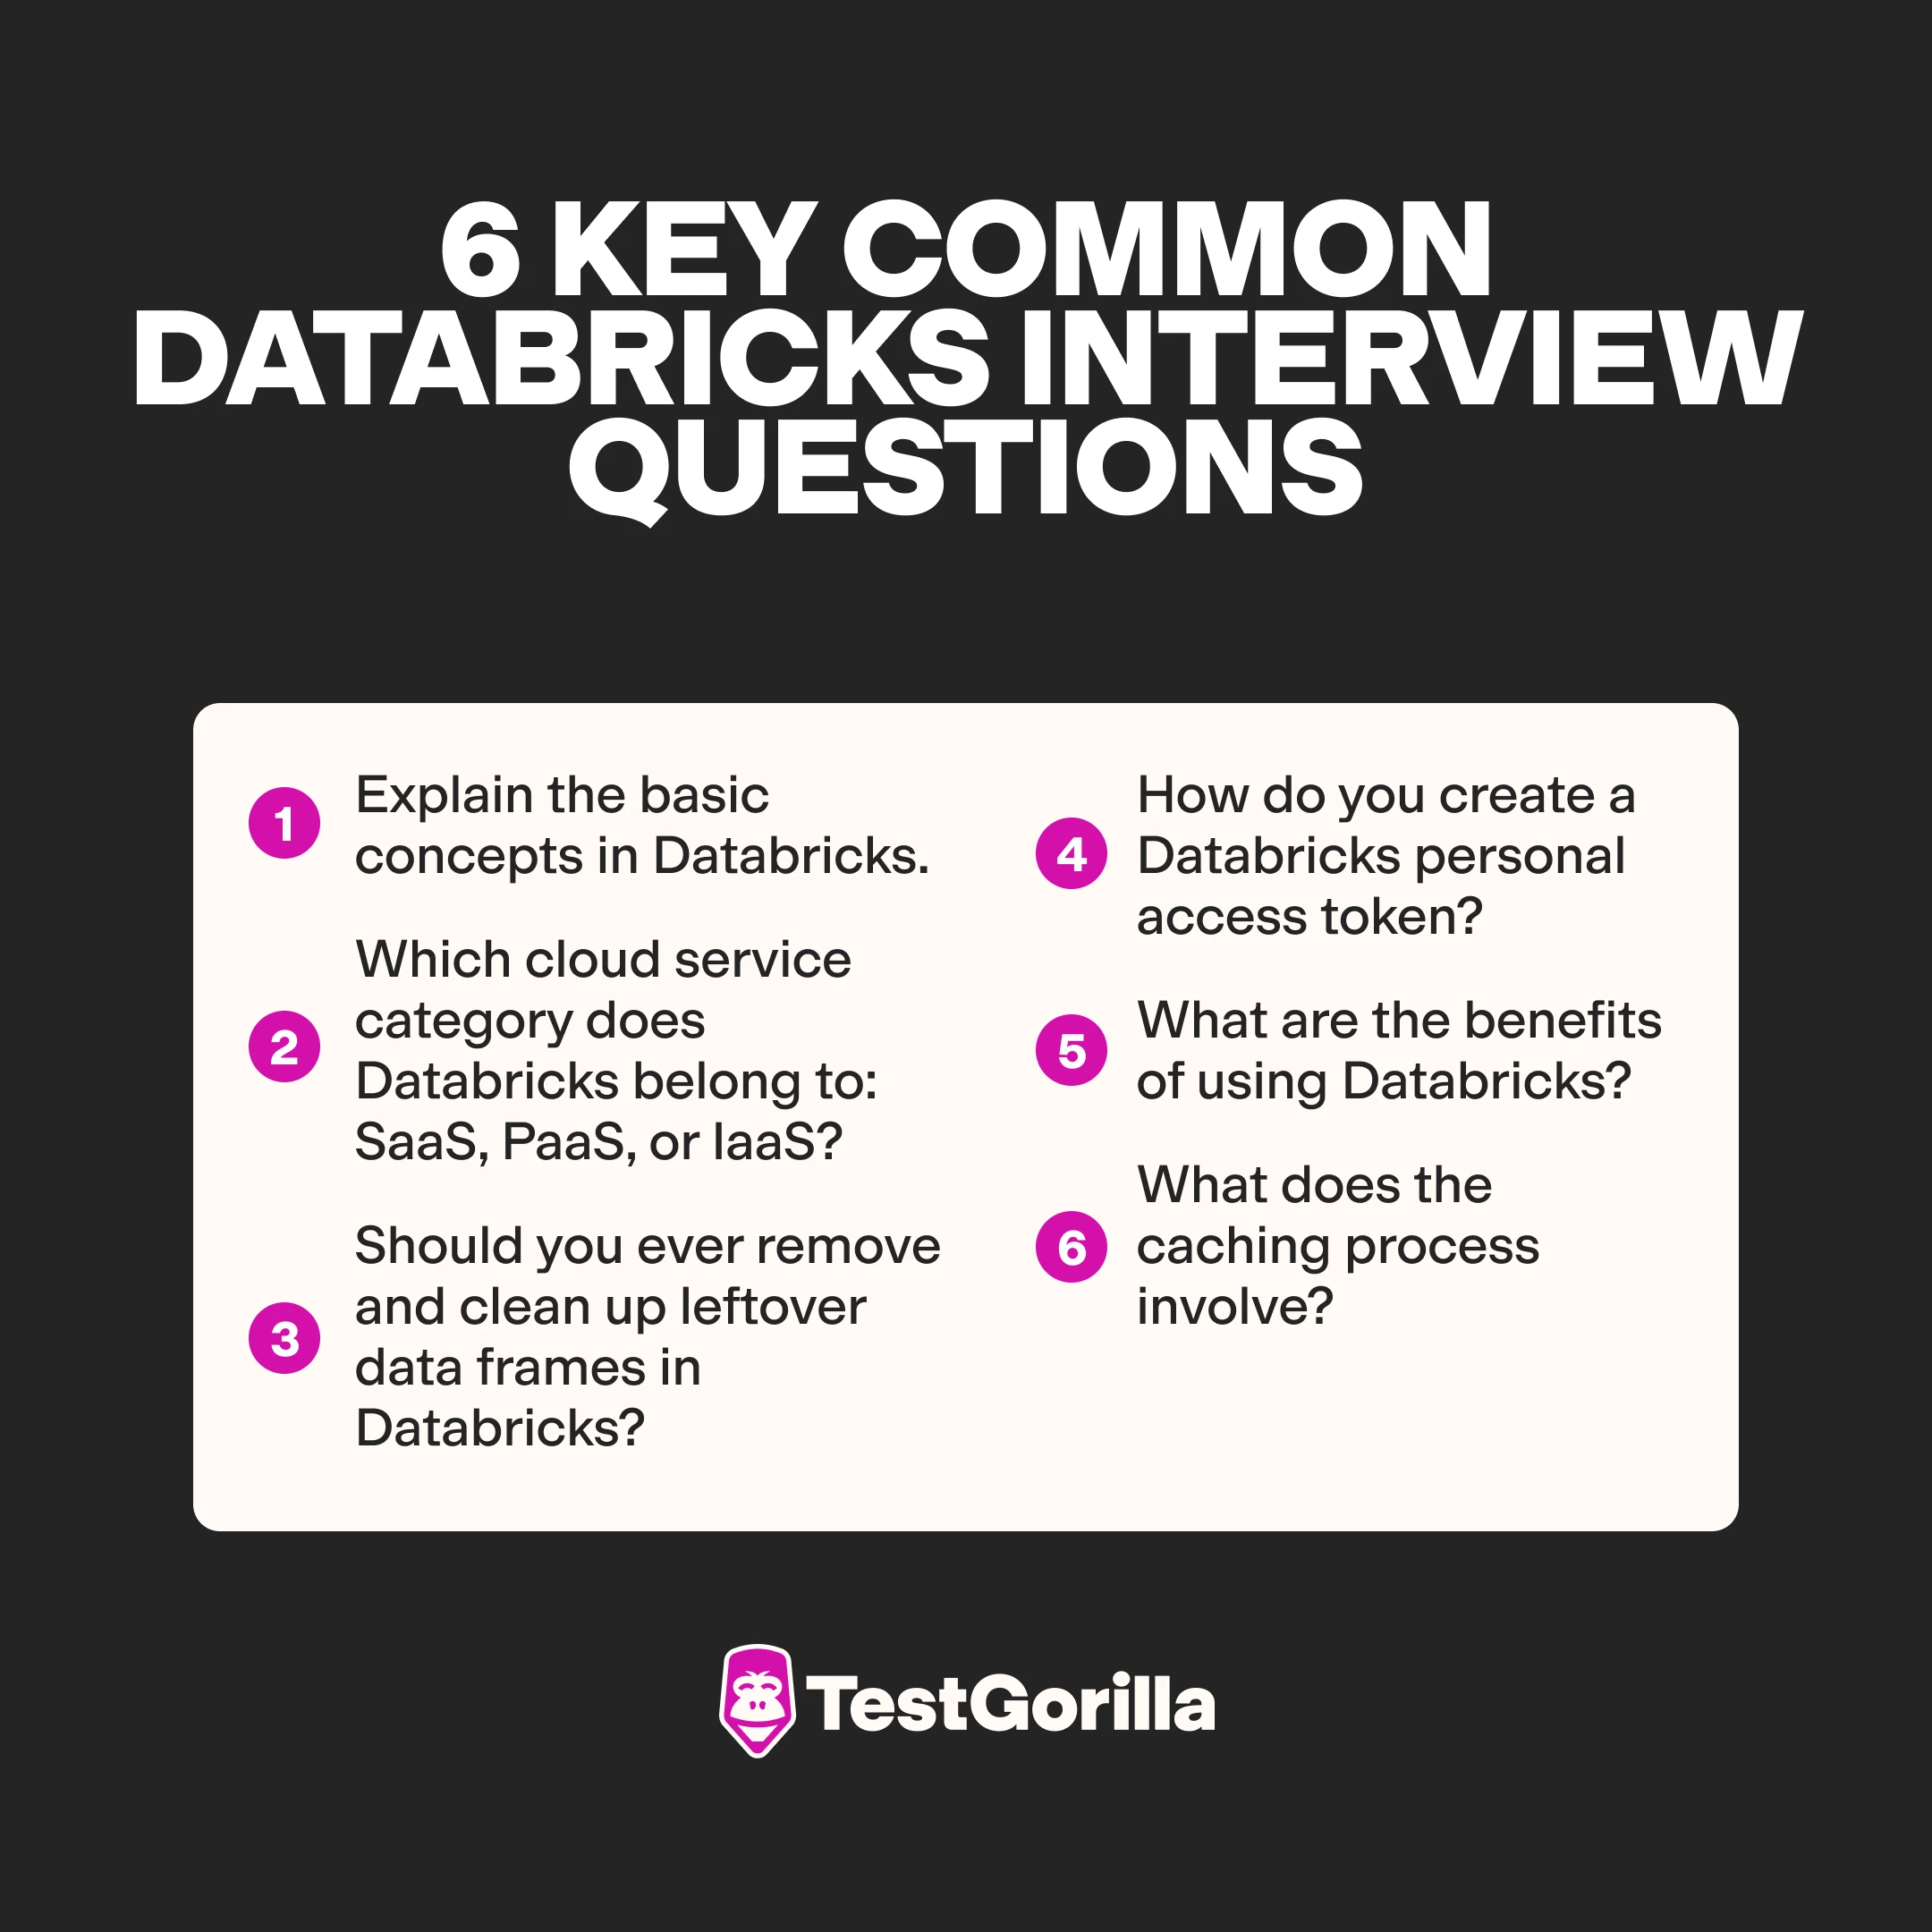 6 key common databricks interview questions